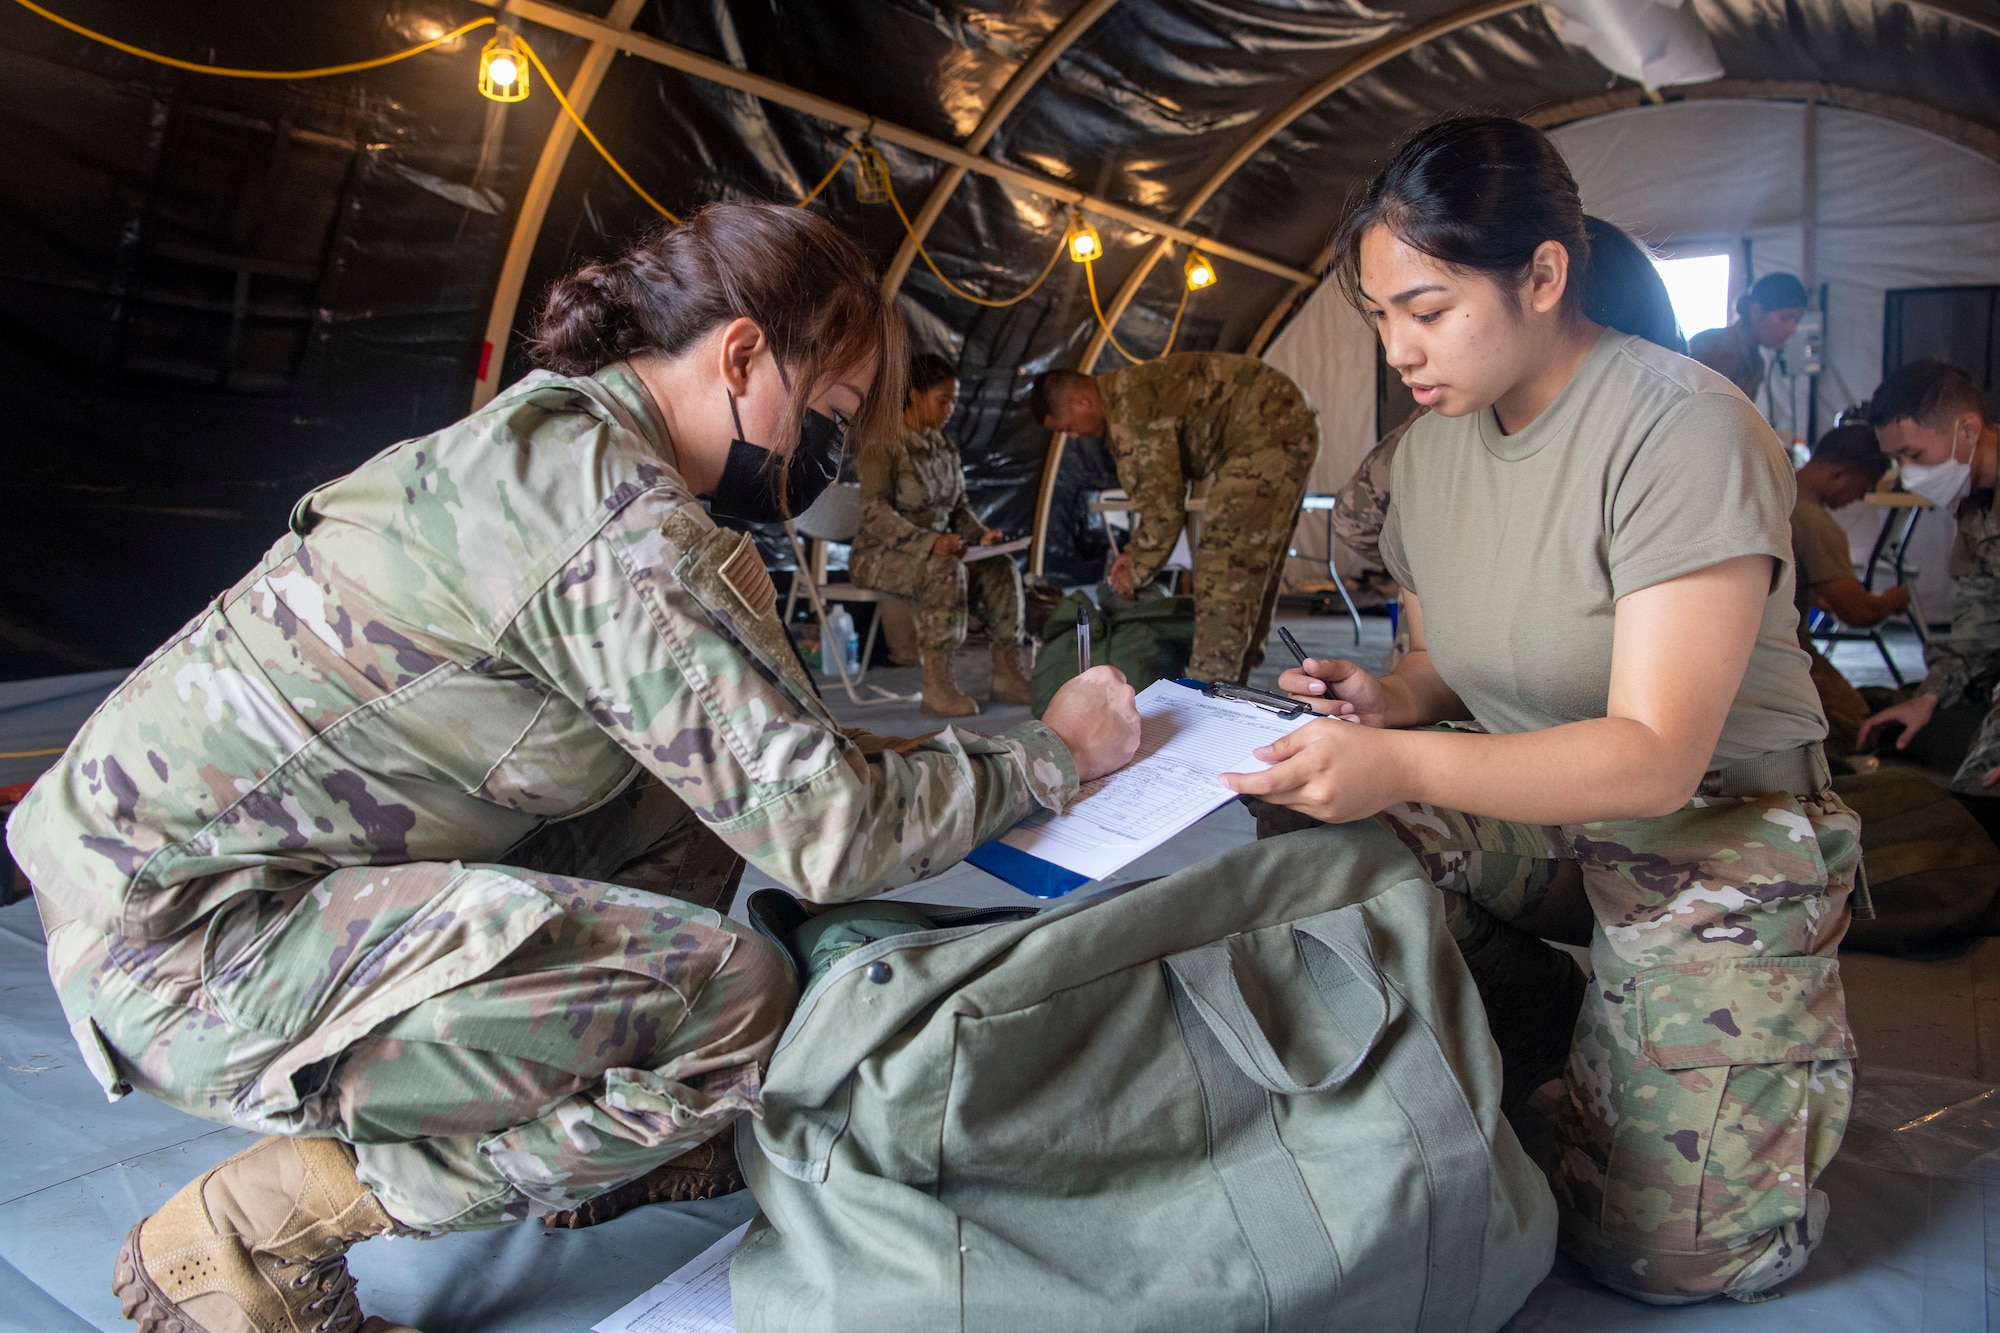 Staff Sgt. Veleeca Conley signs for chemical gear that was issued to her by Airman 1st Class Darlene Ibarra during Pacific Warriorz 2021 (PWZ-21). PWZ-21 is a Total Force Integration and Joint Training exercise at Schofield Barracks, Hawaii June 12, 2021.